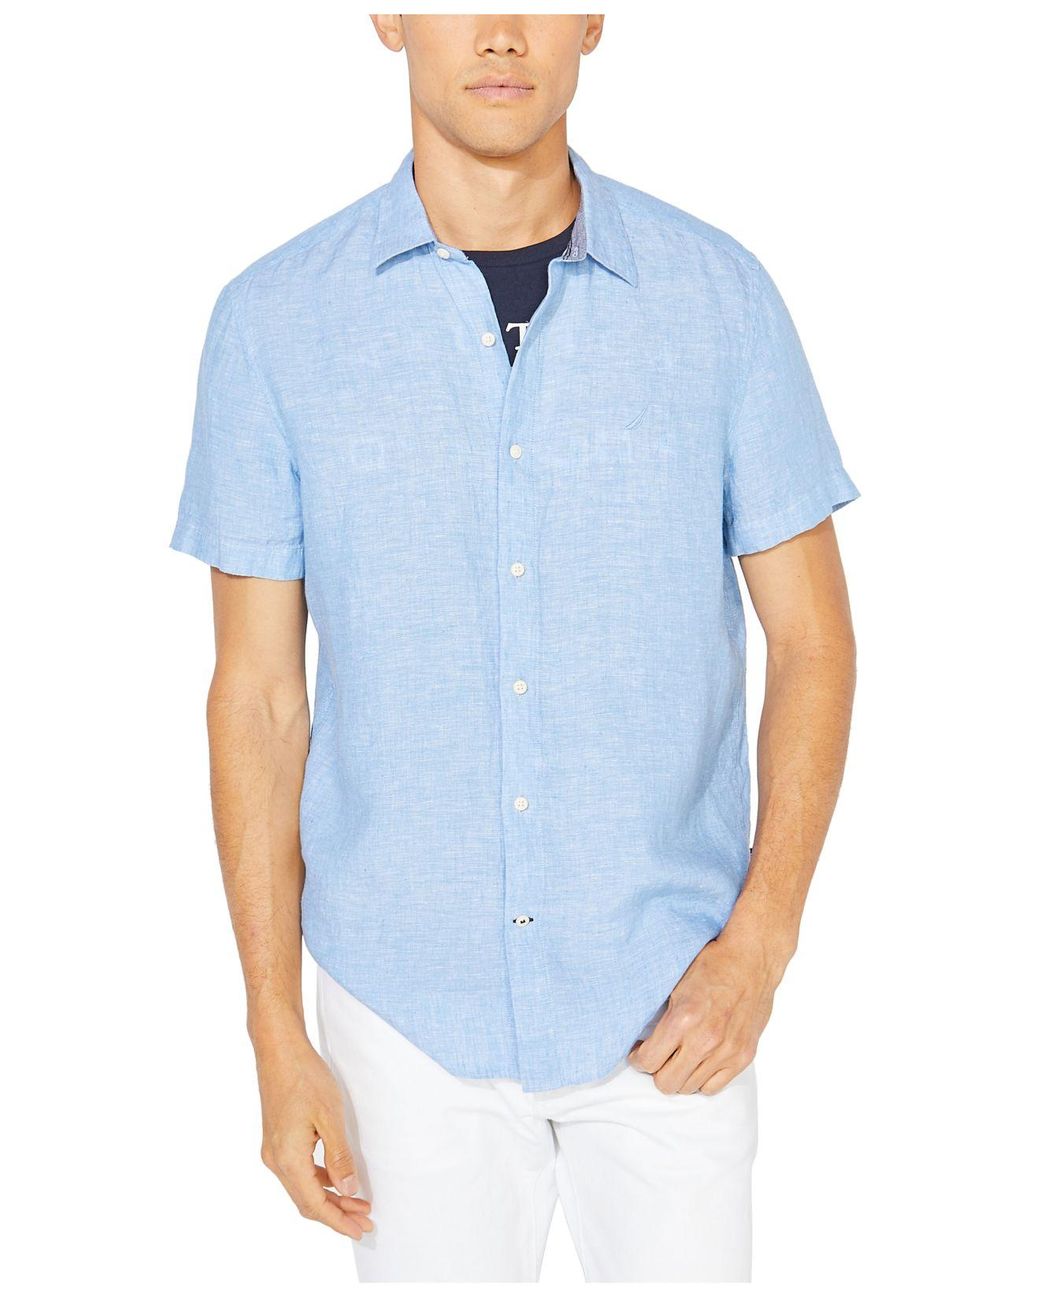 Nautica Classic-fit Solid Linen Shirt in Blue for Men - Lyst